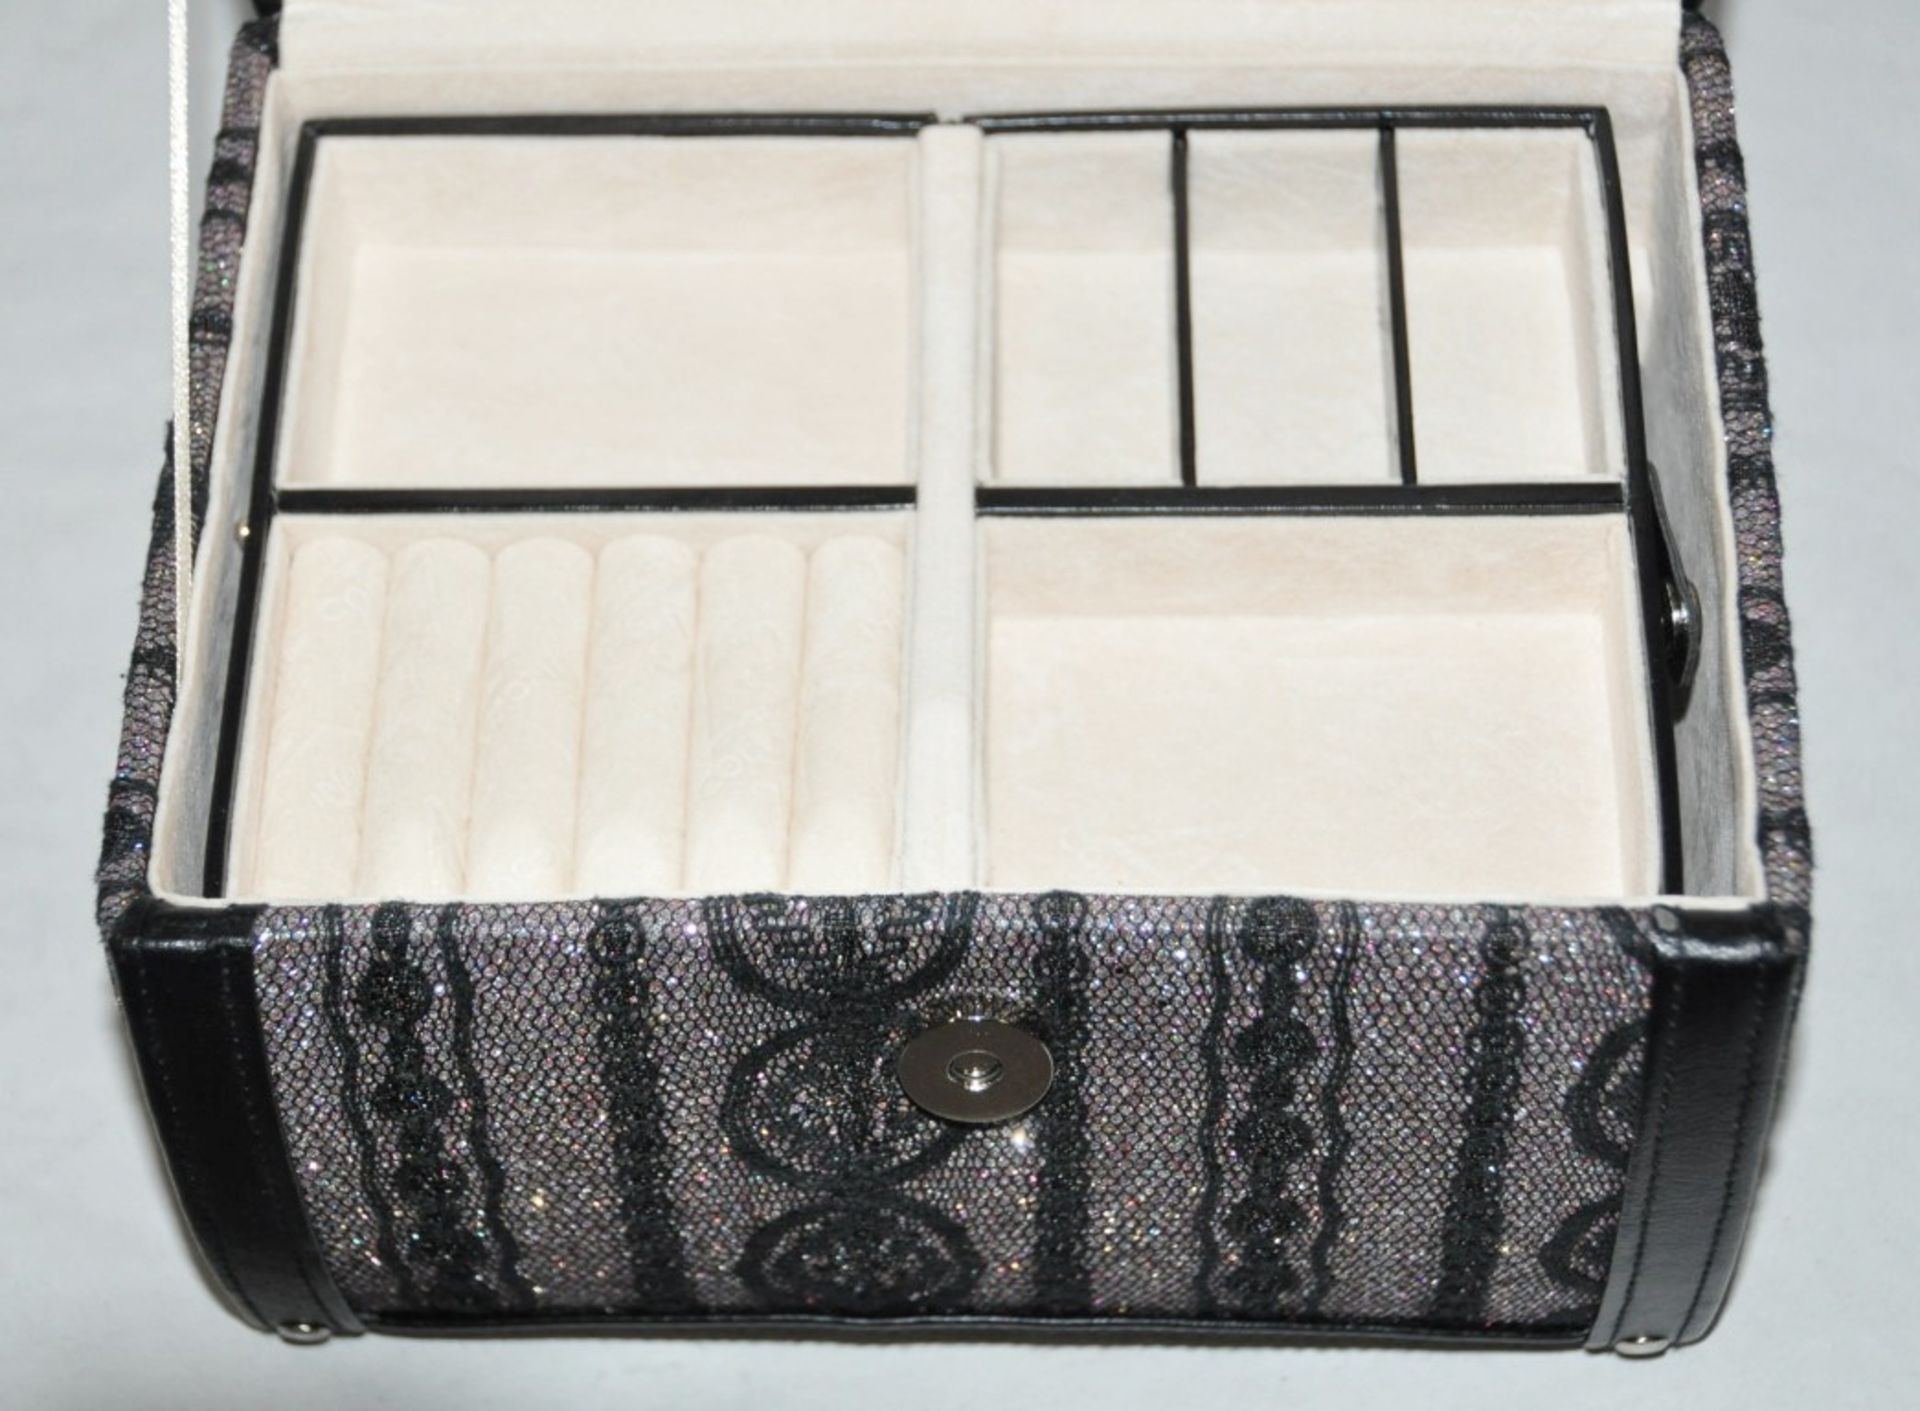 1 x "AB Collezioni" Italian Luxury Jewellery Case (34154N) - Ref LT111  – Features A Pull-Out - Image 4 of 5